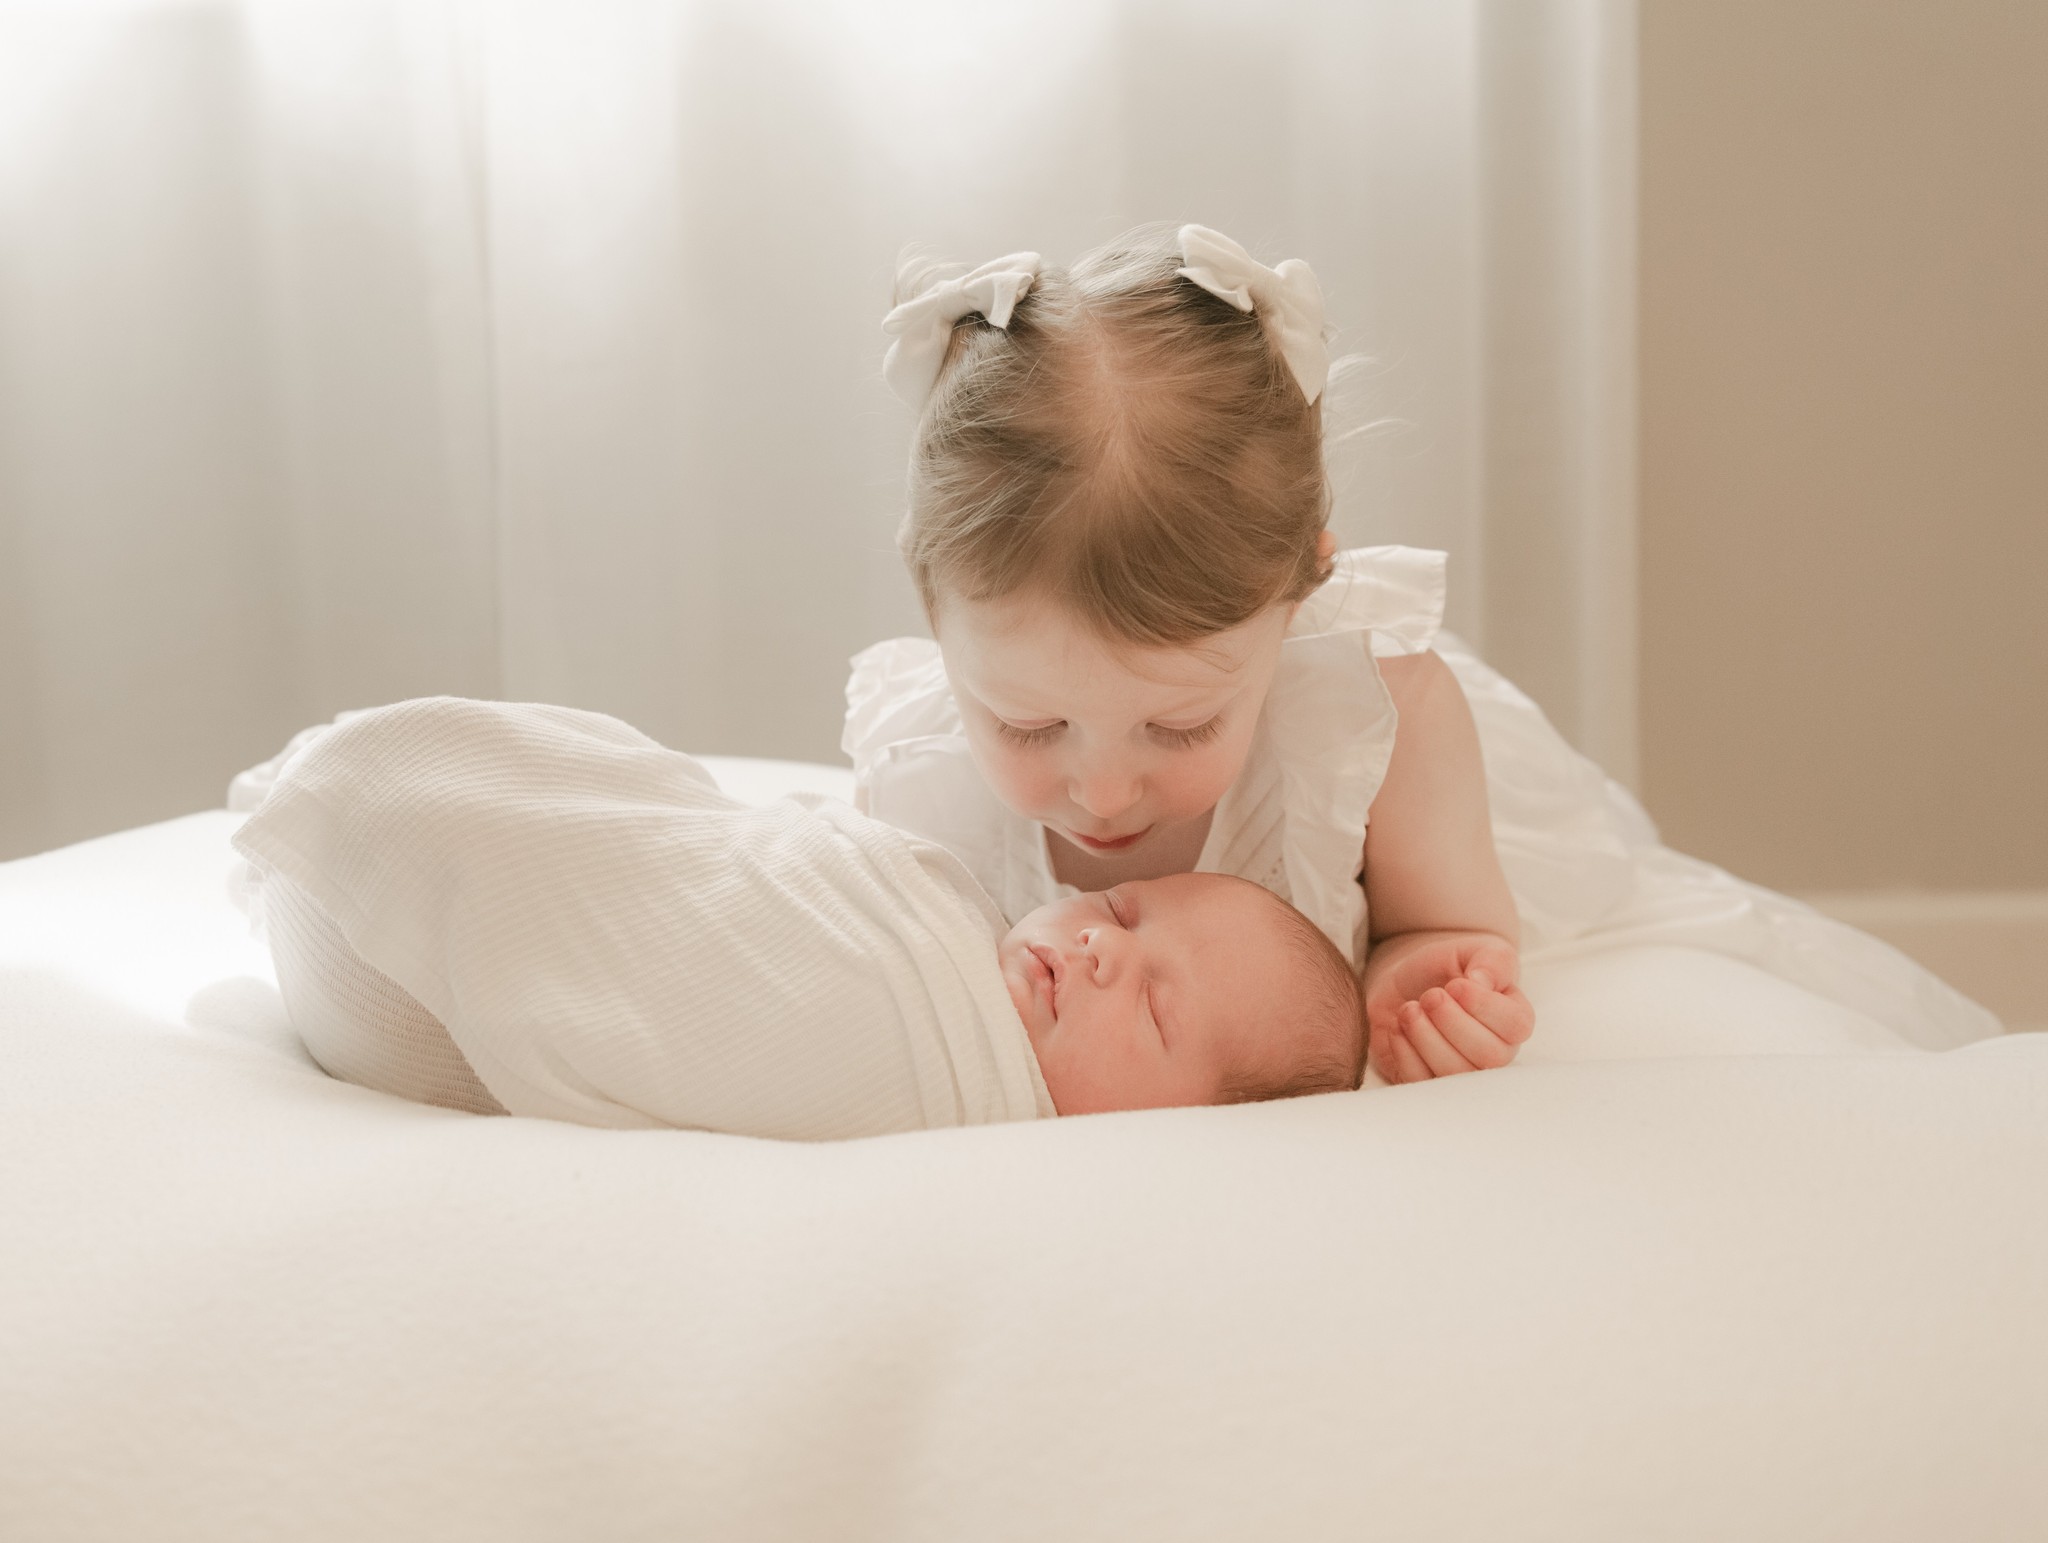 A toddler girl in a white dress lays on a bed overtop her sleeping newborn baby sibling well born baby